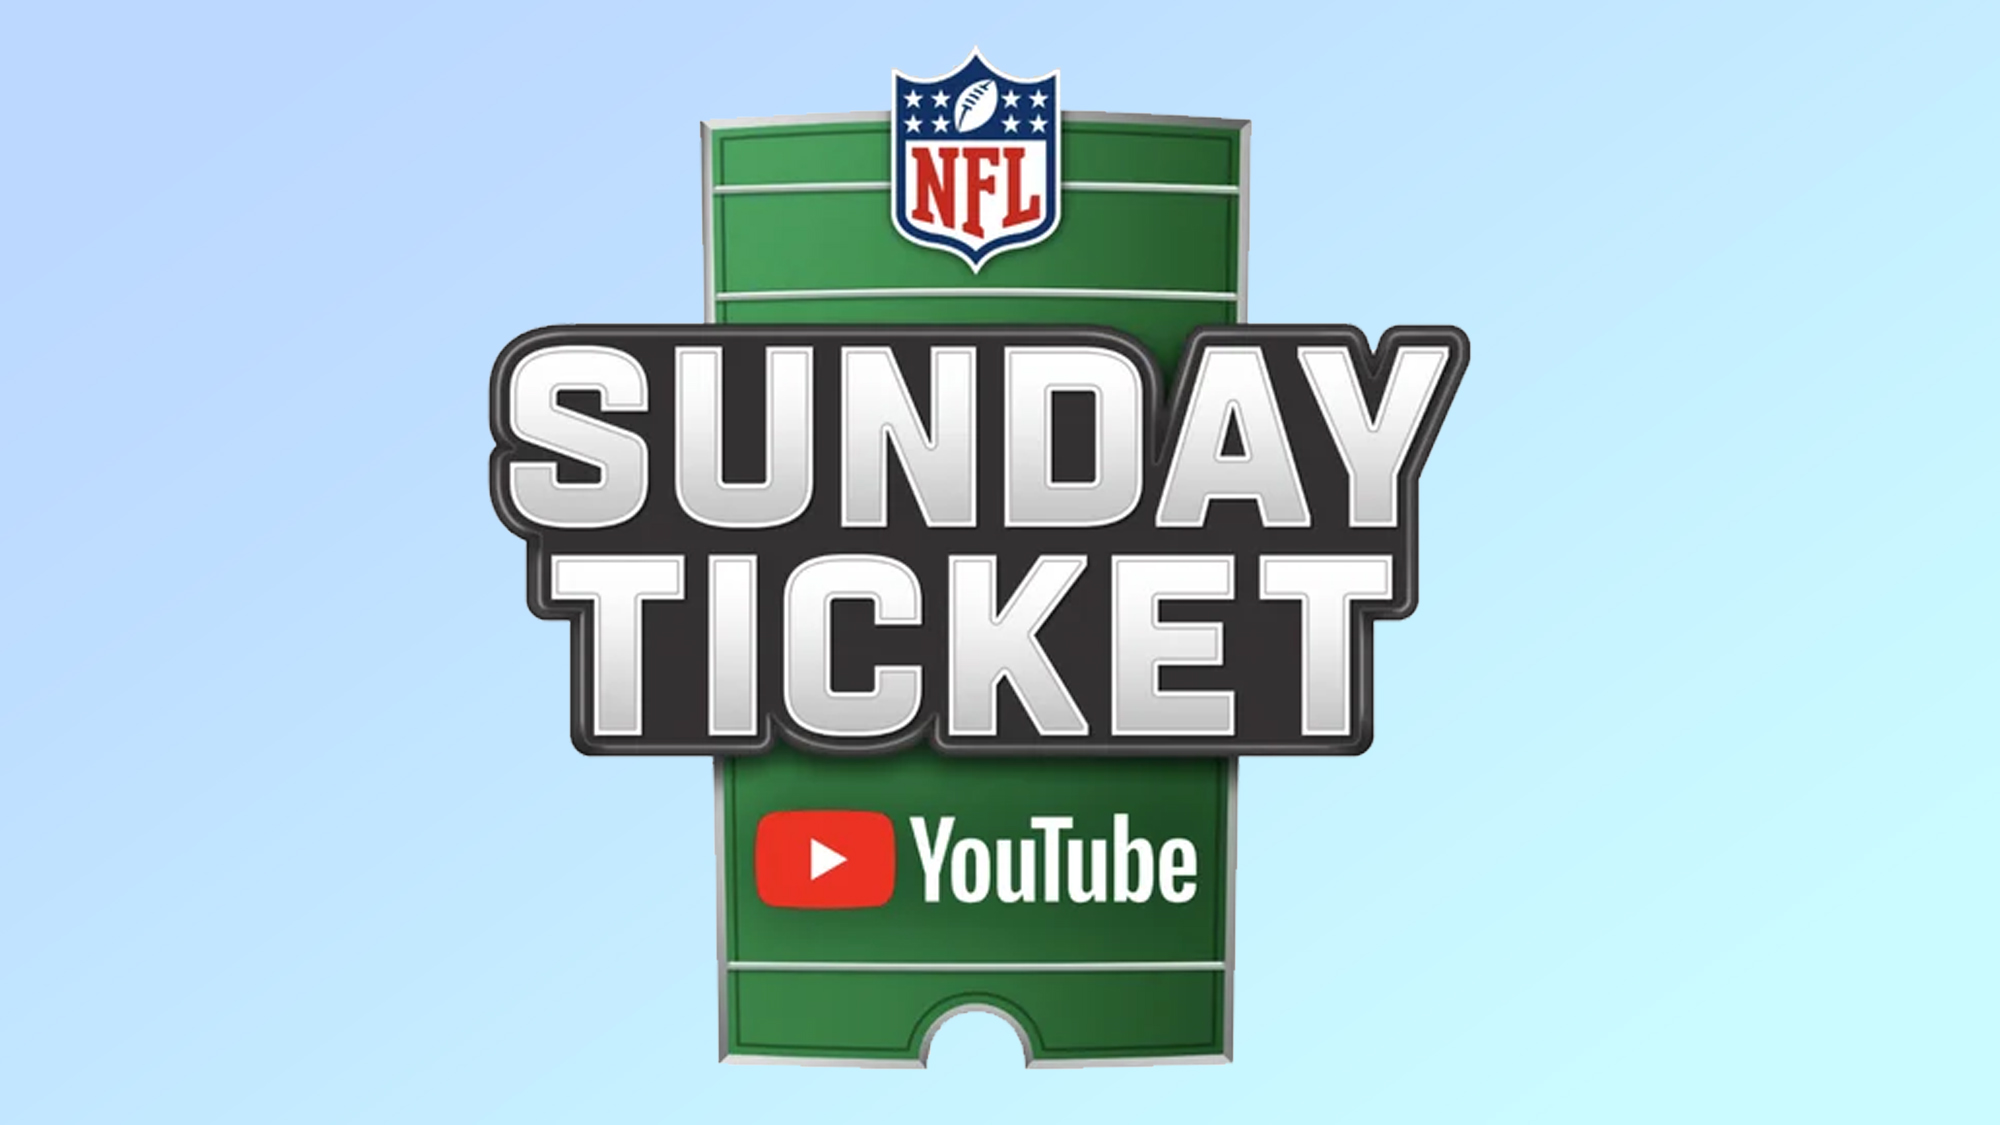 nfl game day pass student